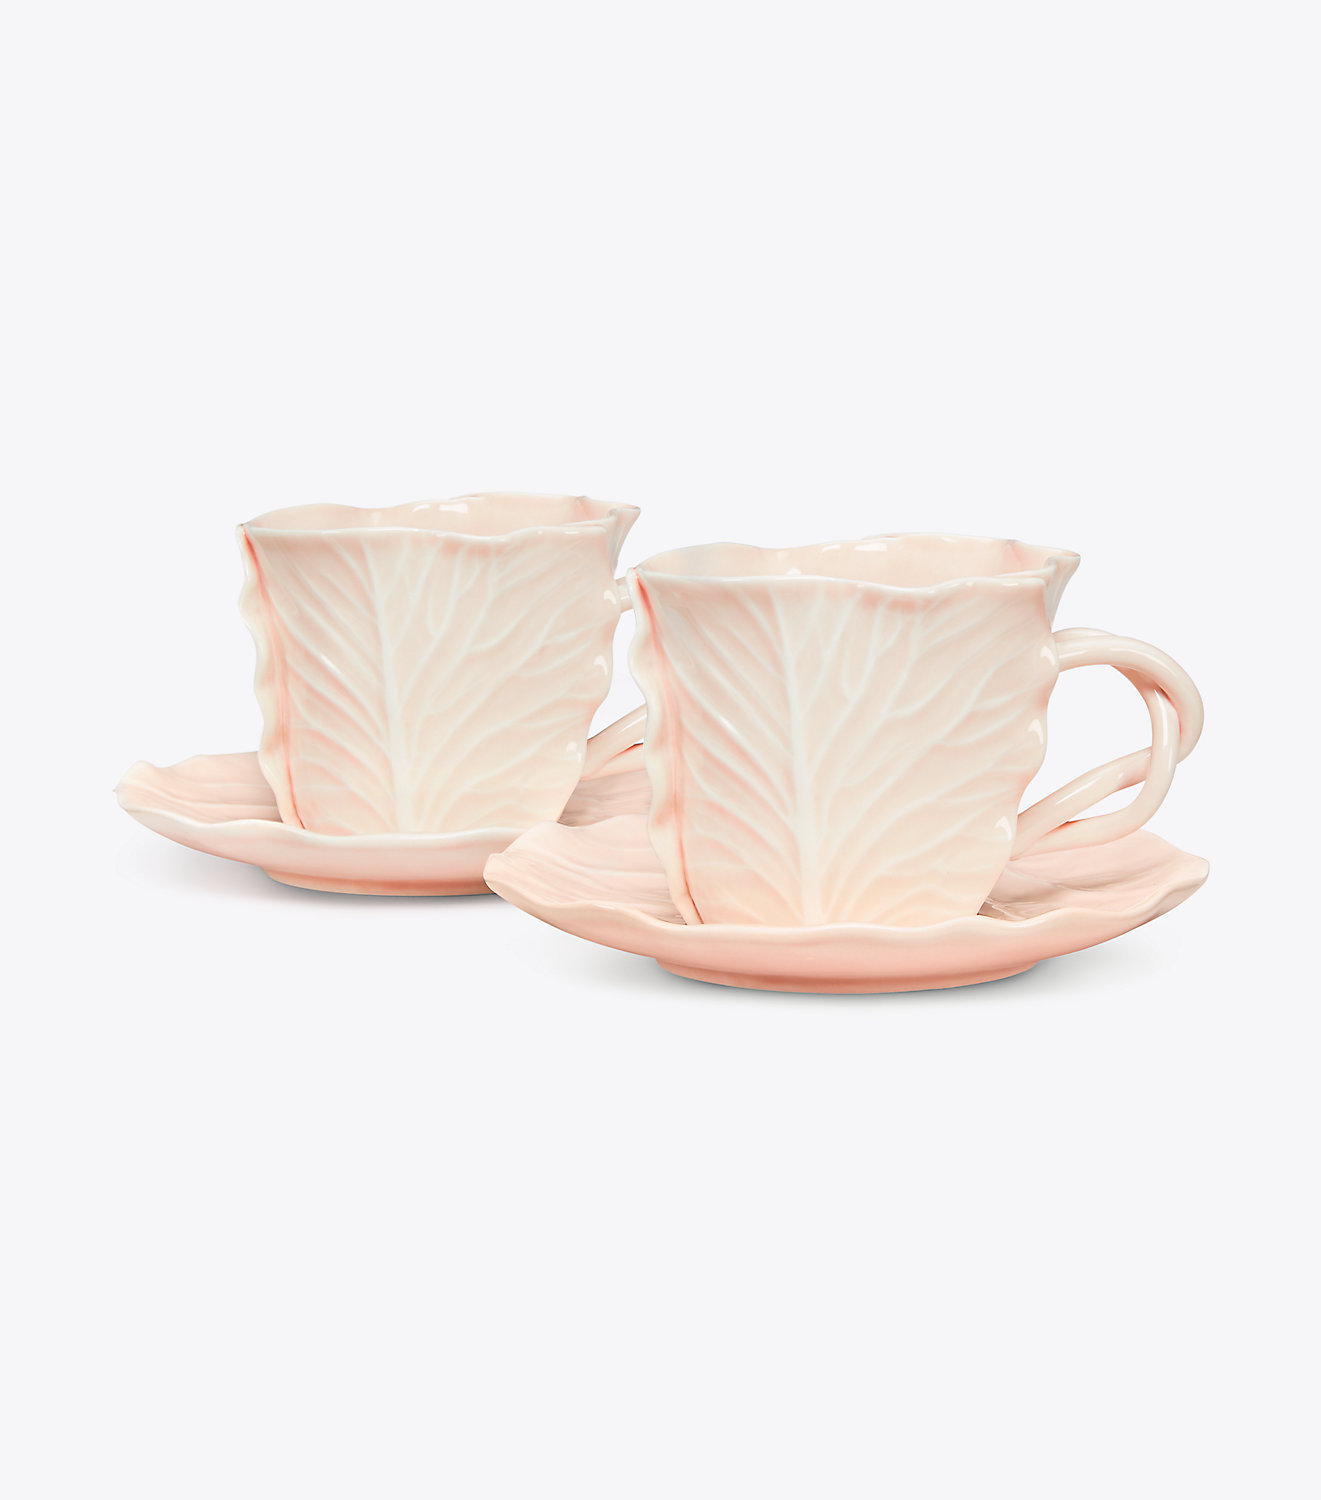 tory-burch-dodie-thayer-lettuce-ware-cabbage-pink-tea-cup-saucer-porcelain -ceramic